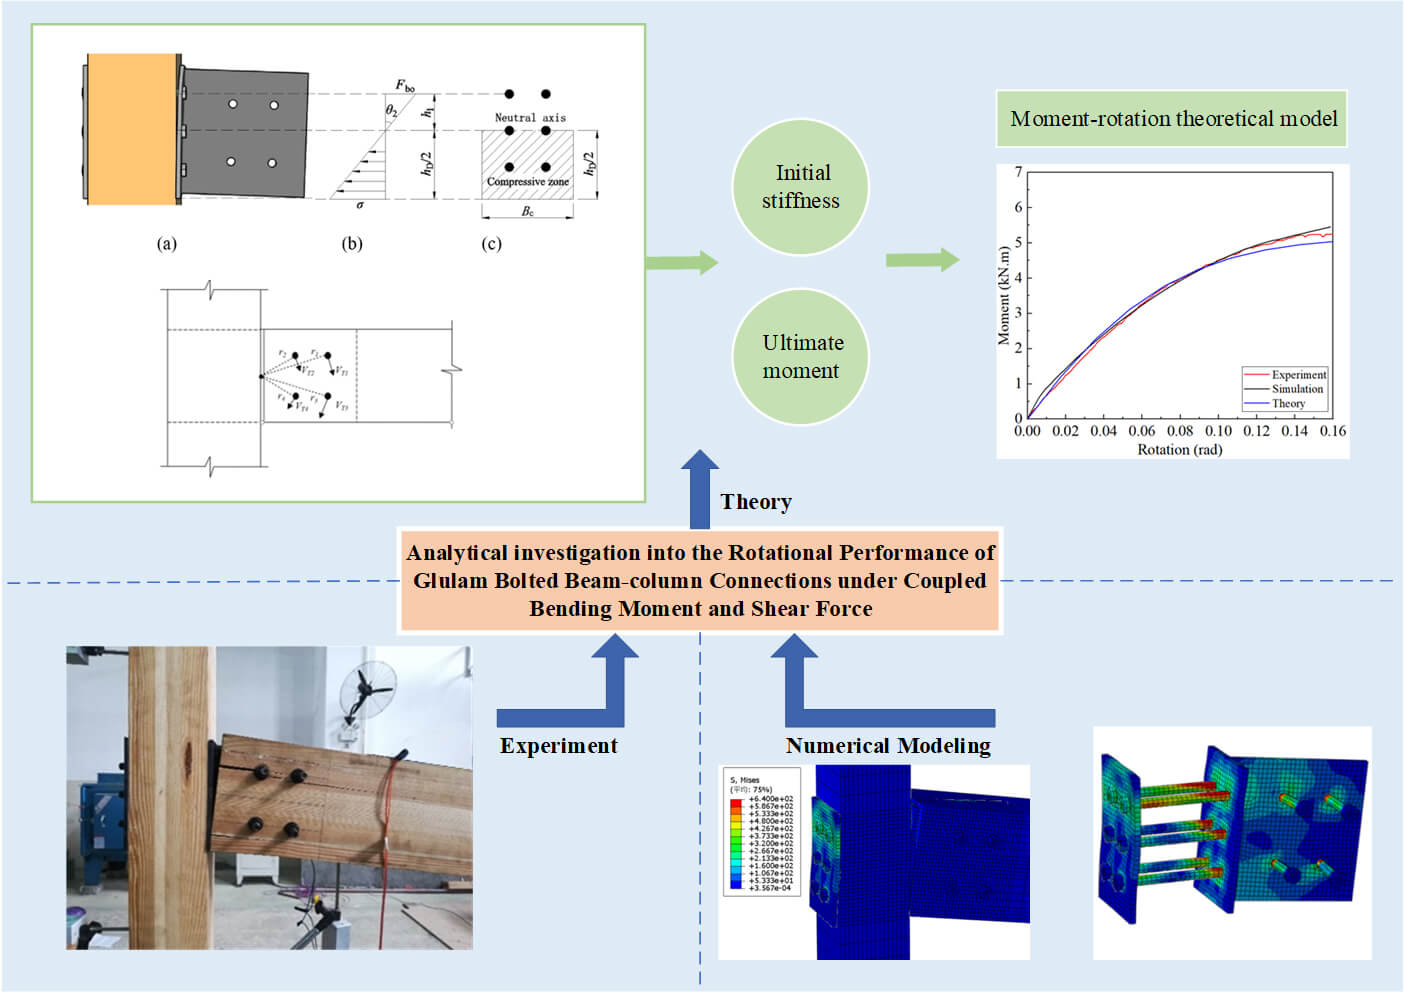 Analytical Investigation into the Rotational Performance of Glulam Bolted Beam-Column Connections under Coupled Bending Moment and Shear Force